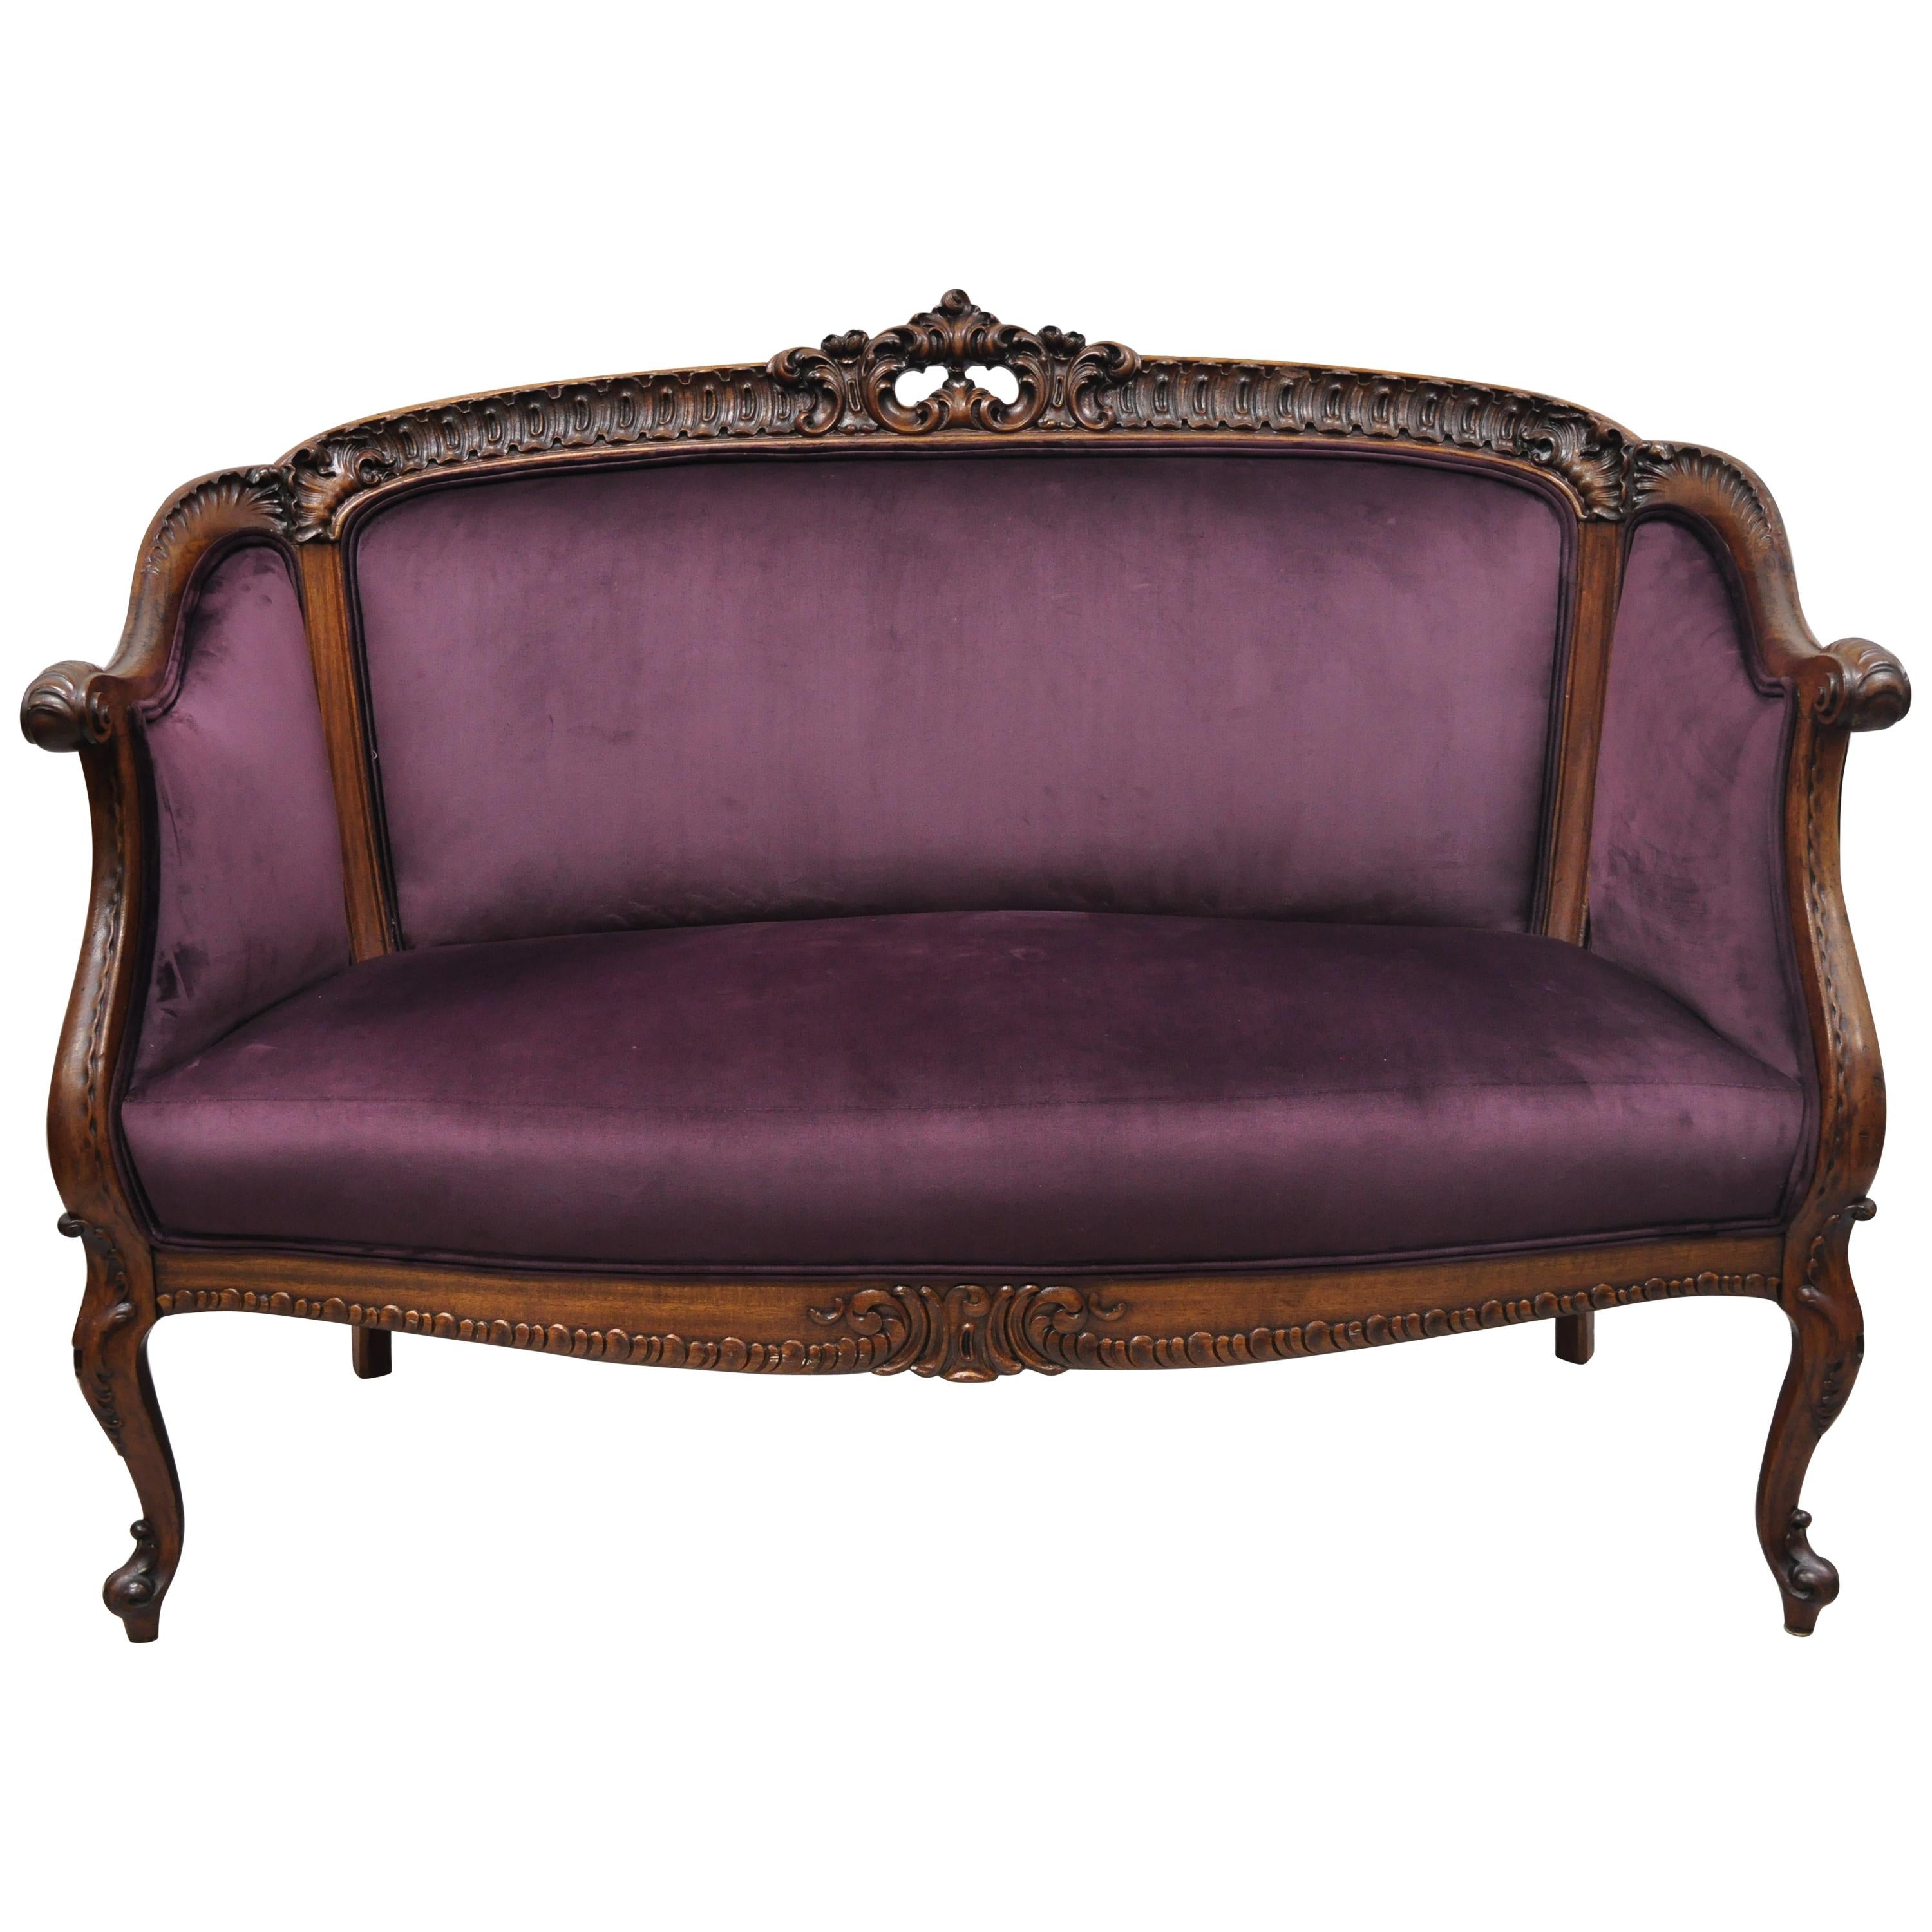 19th Century French Rococo Louis XV style handcrafted and foil gilded  Elegant Loveseat Settee